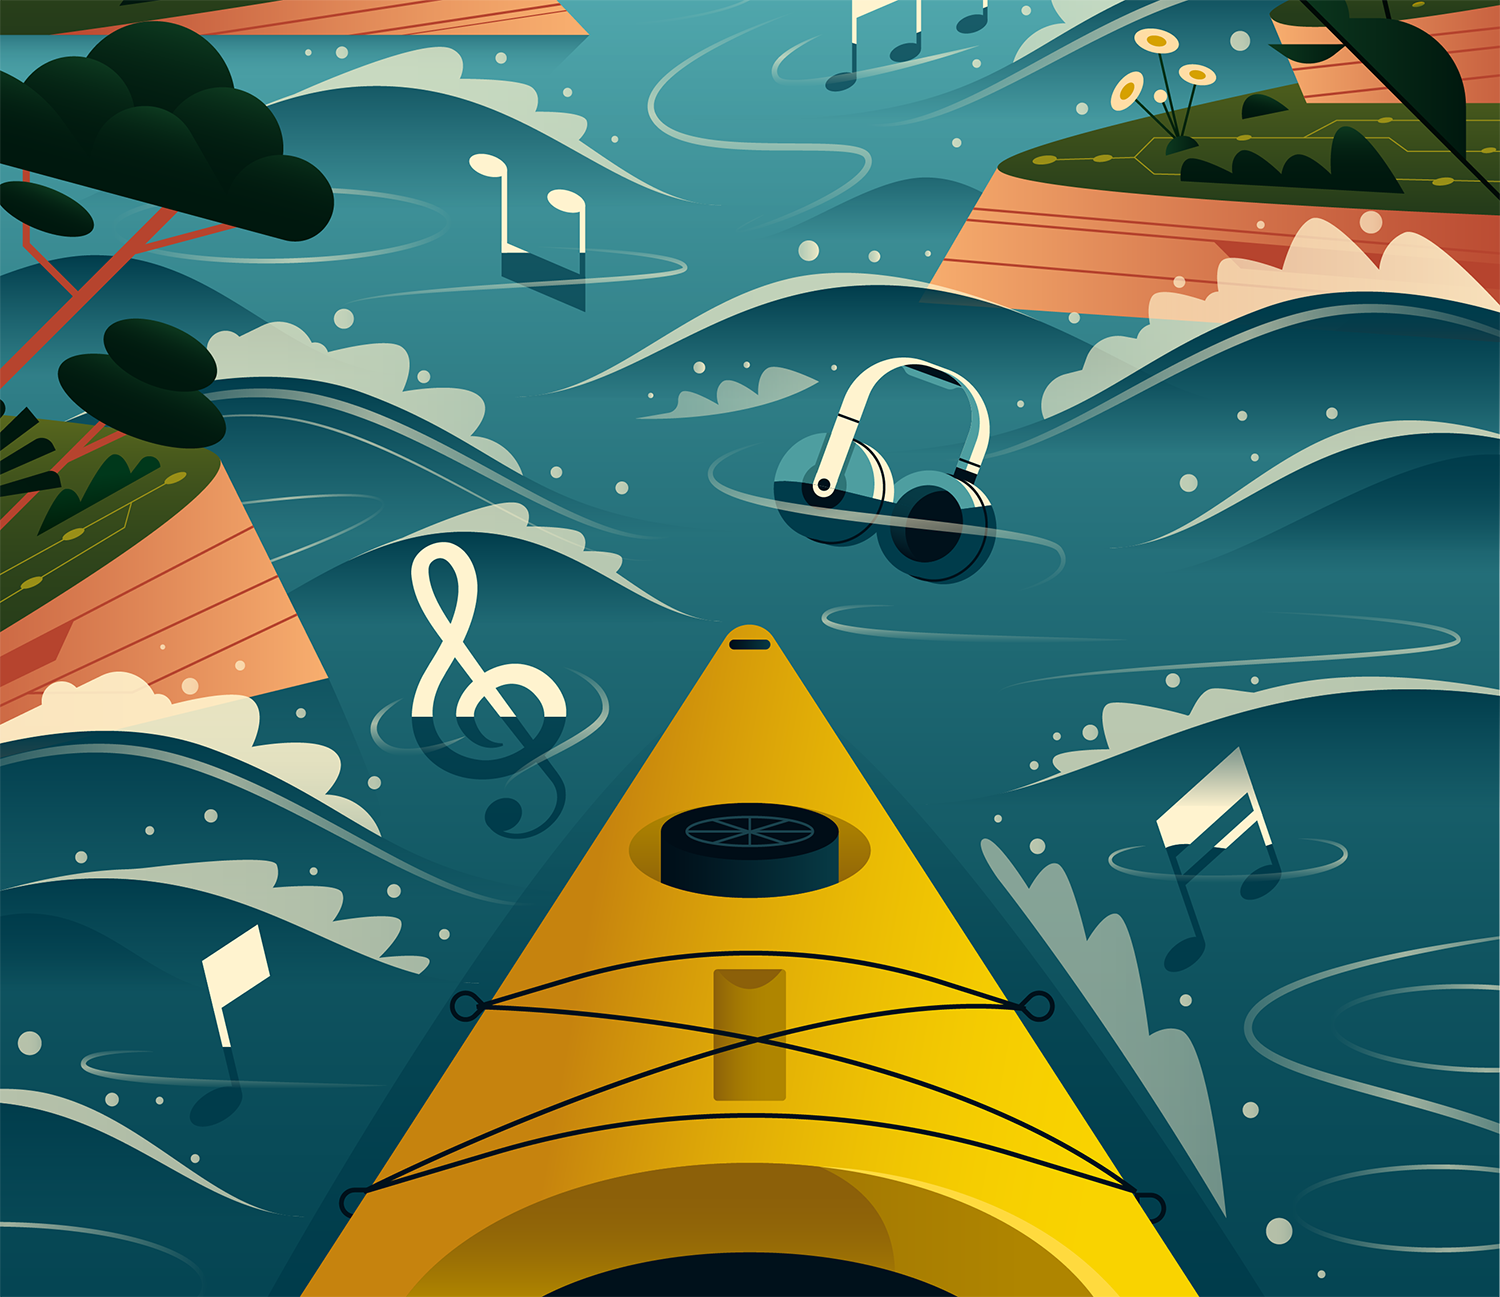 Front of a kayak moving through a stream with music notes, headphones, etc. floating in the stream